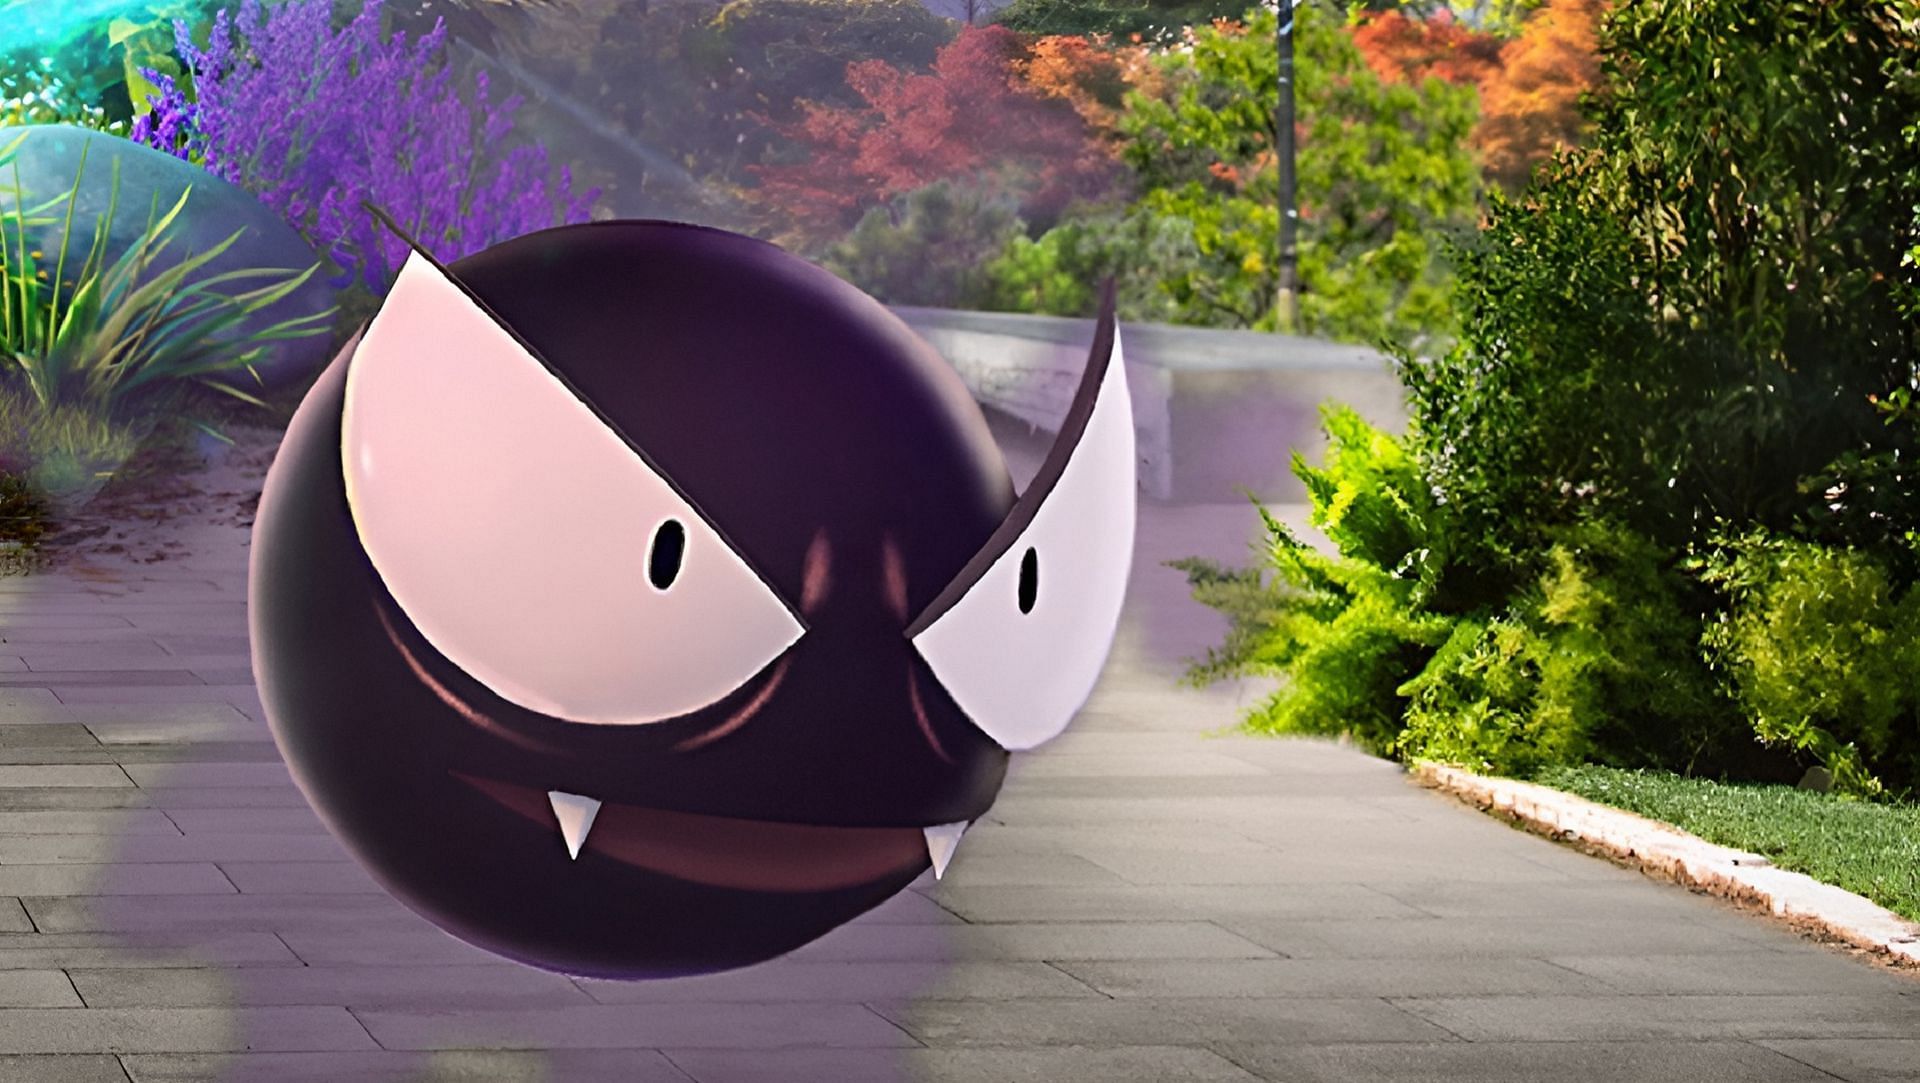 Gastly evolves into the powerful Gengar in Pokemon GO (Image via Niantic)